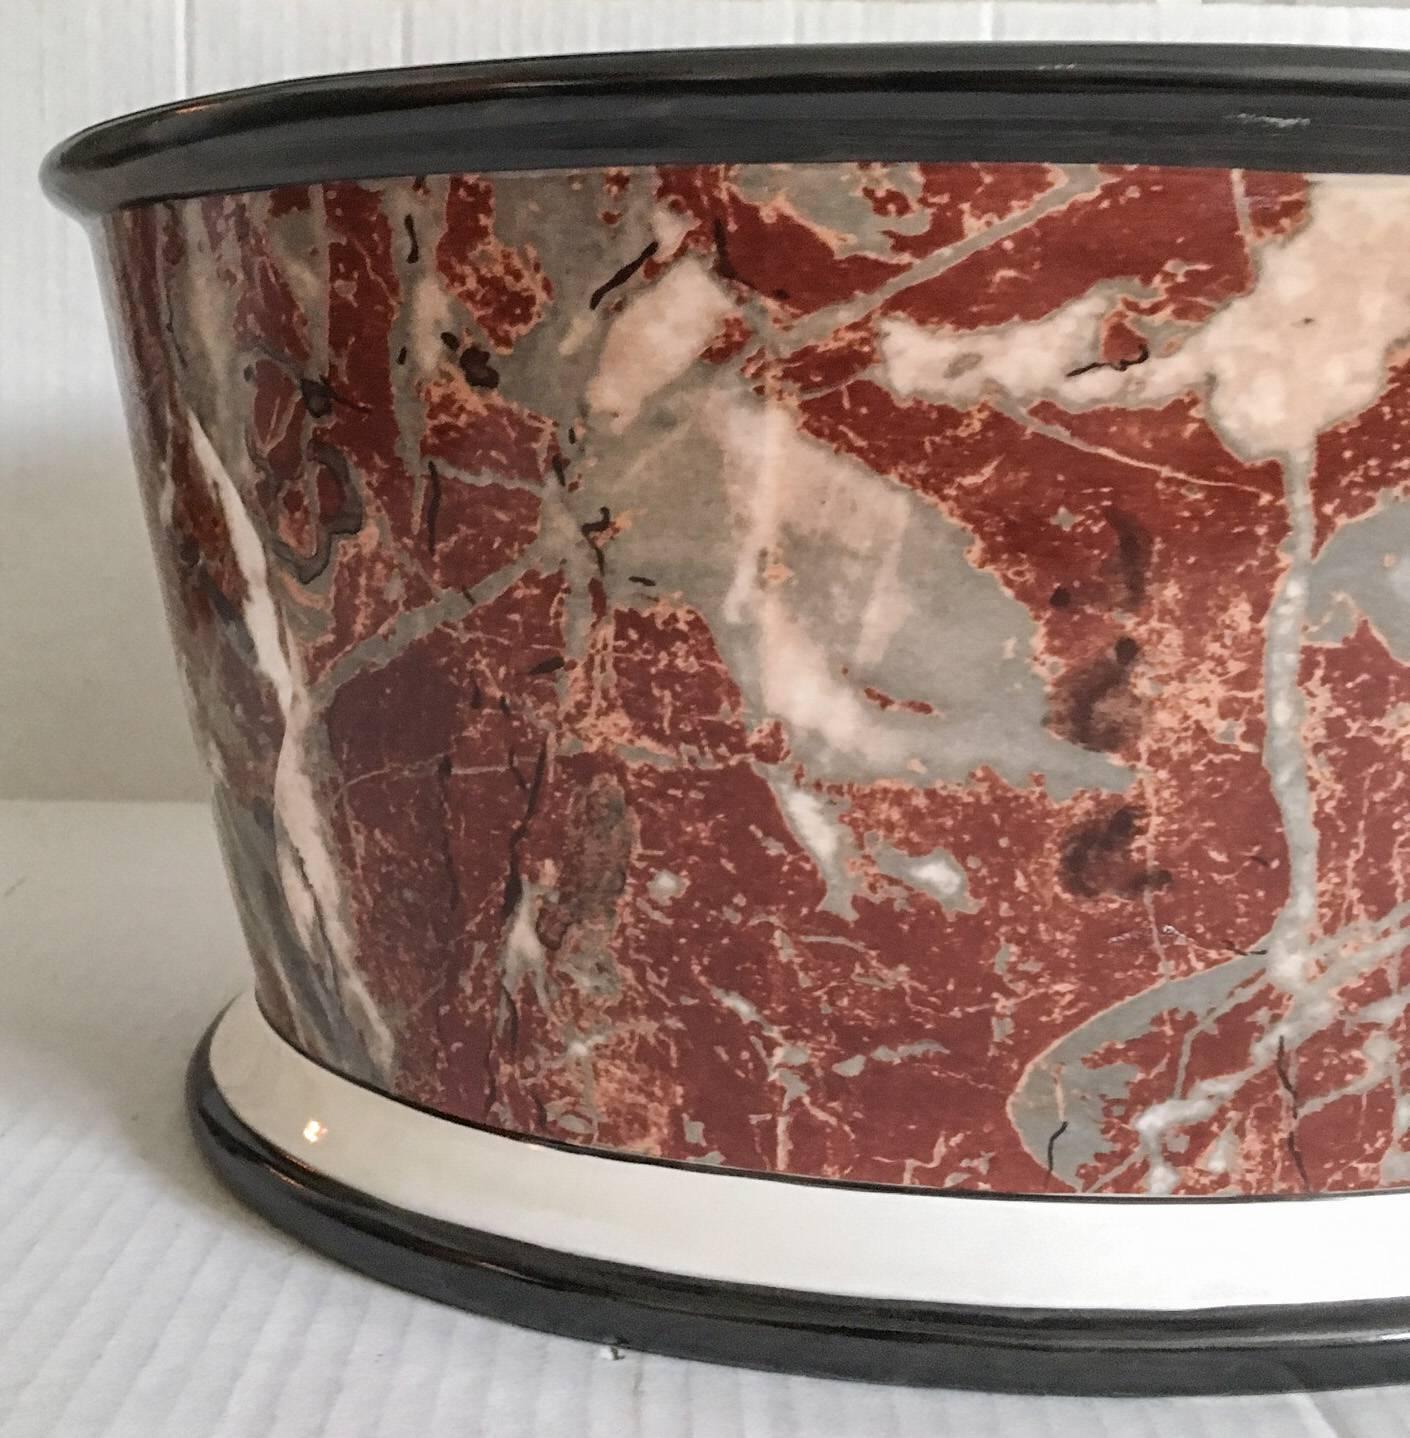 Offered is a superb large-scale oval hand-painted jardiniere, decorated in the trompe l'oeil style with a reddish orange marble motif, finished with black banding along the top and bottom against a cream ground. Marked "Made in Italy;"